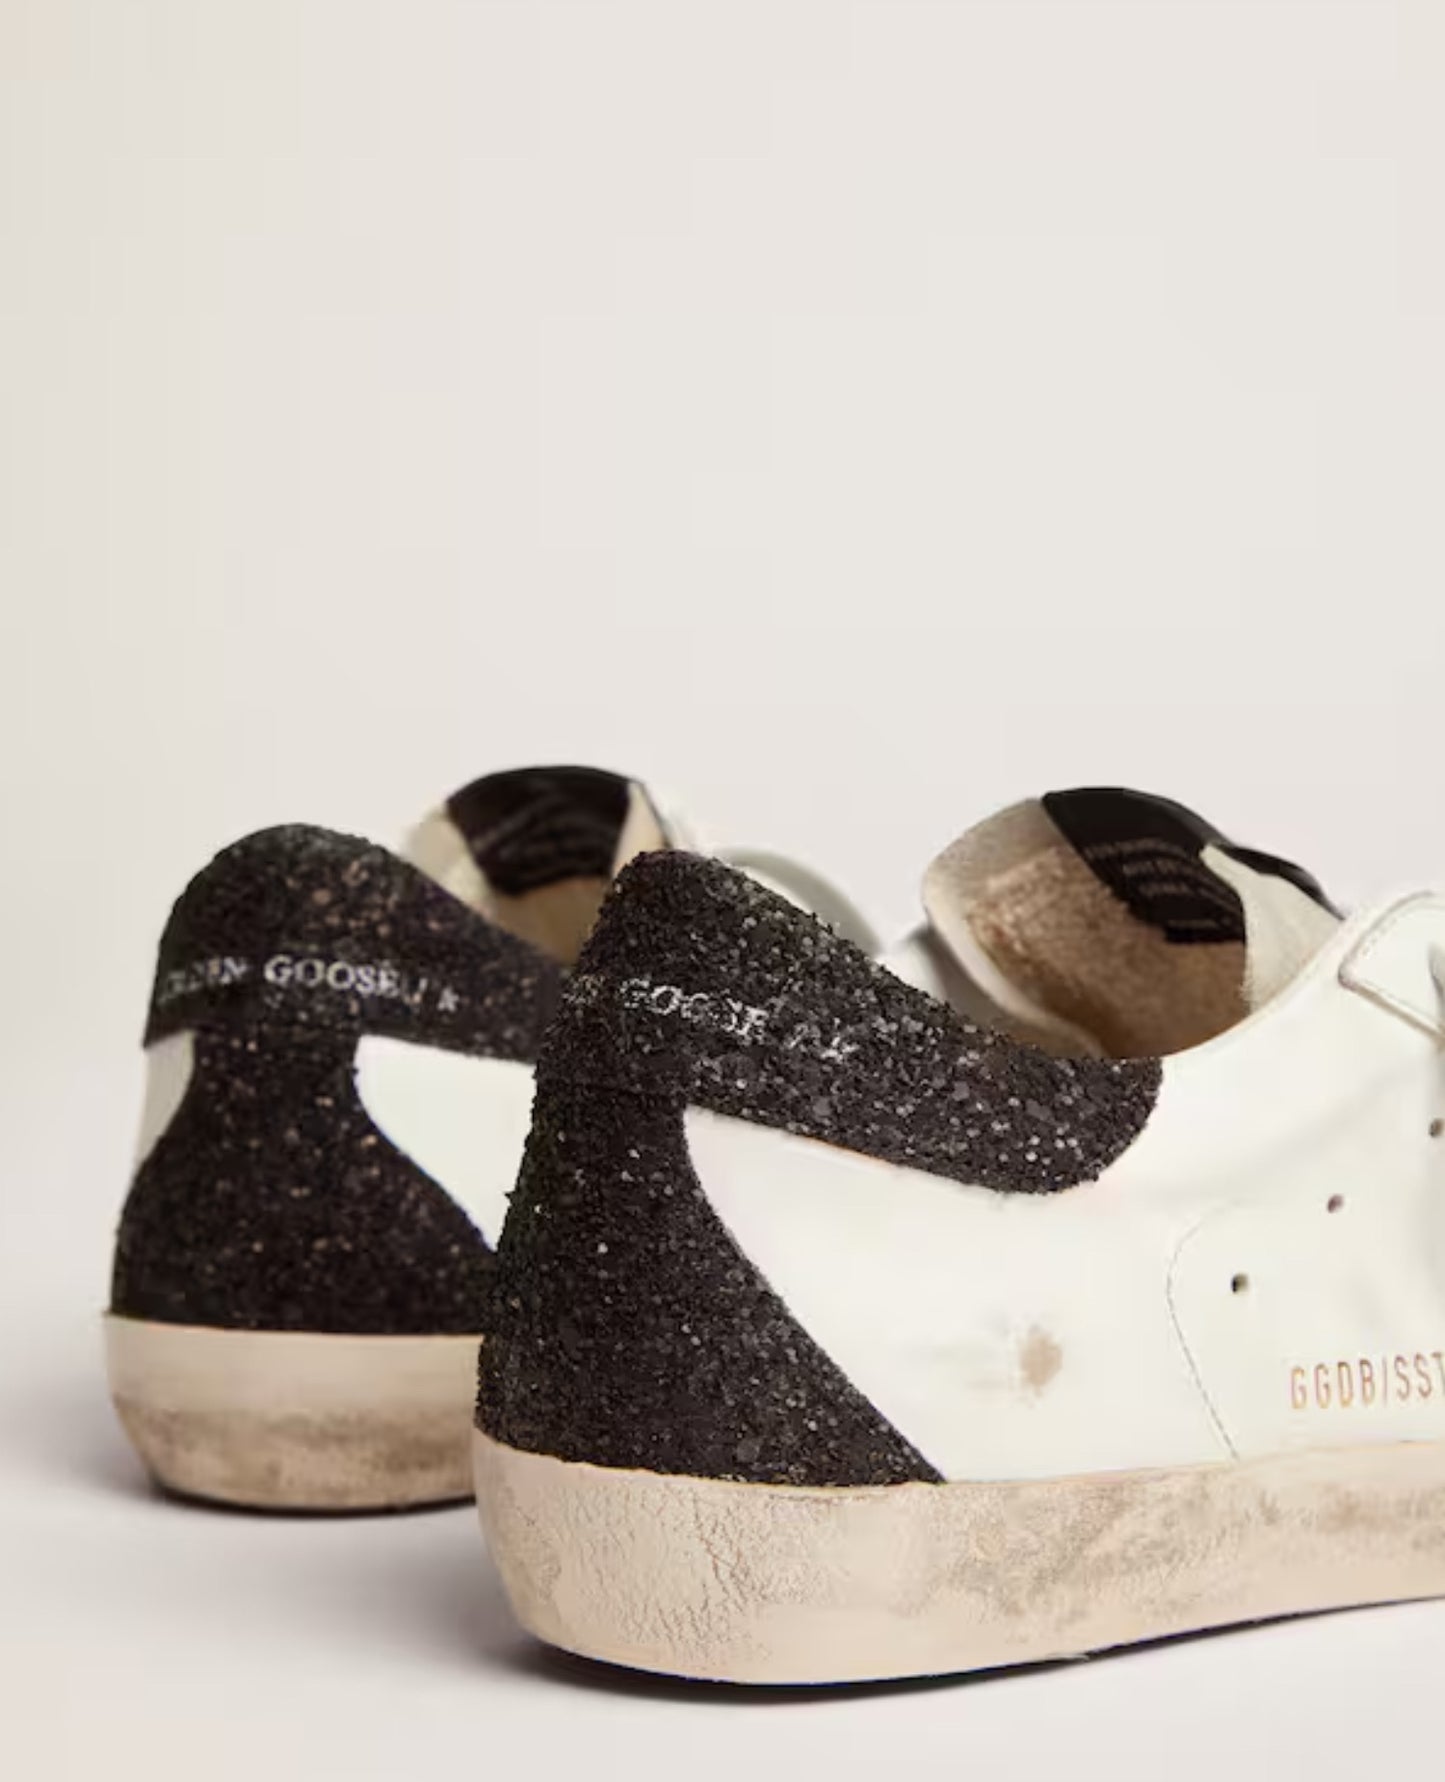 Golden Goose
Women's Super-Star with gold star and black glitter heel tab